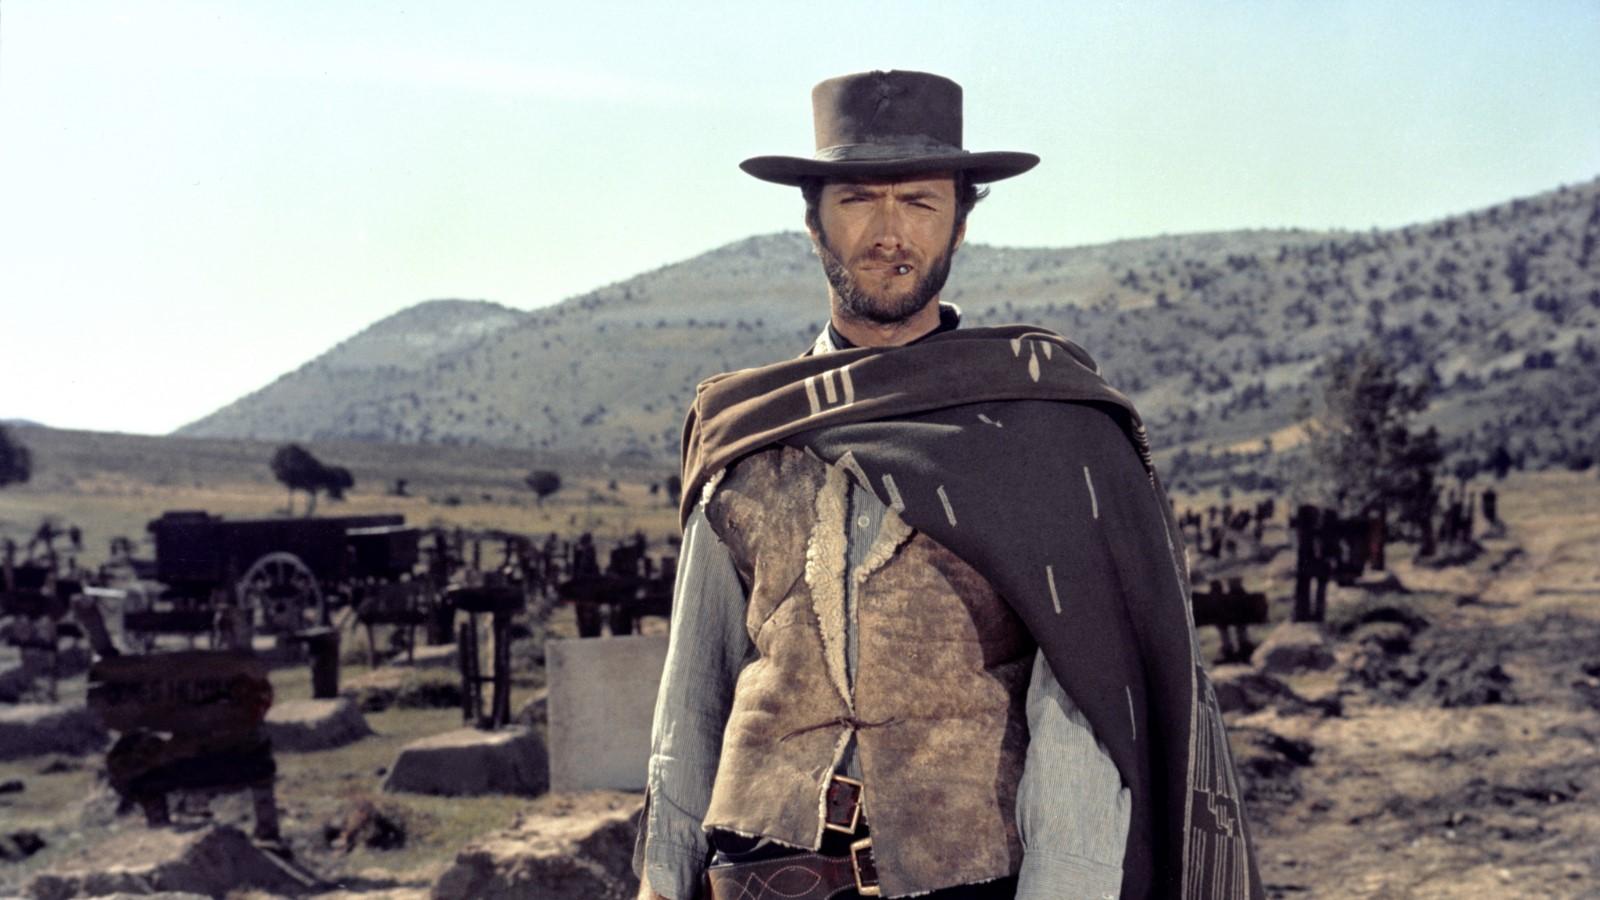 Clint Eastwood in The Good, The Bad, and The Ugly